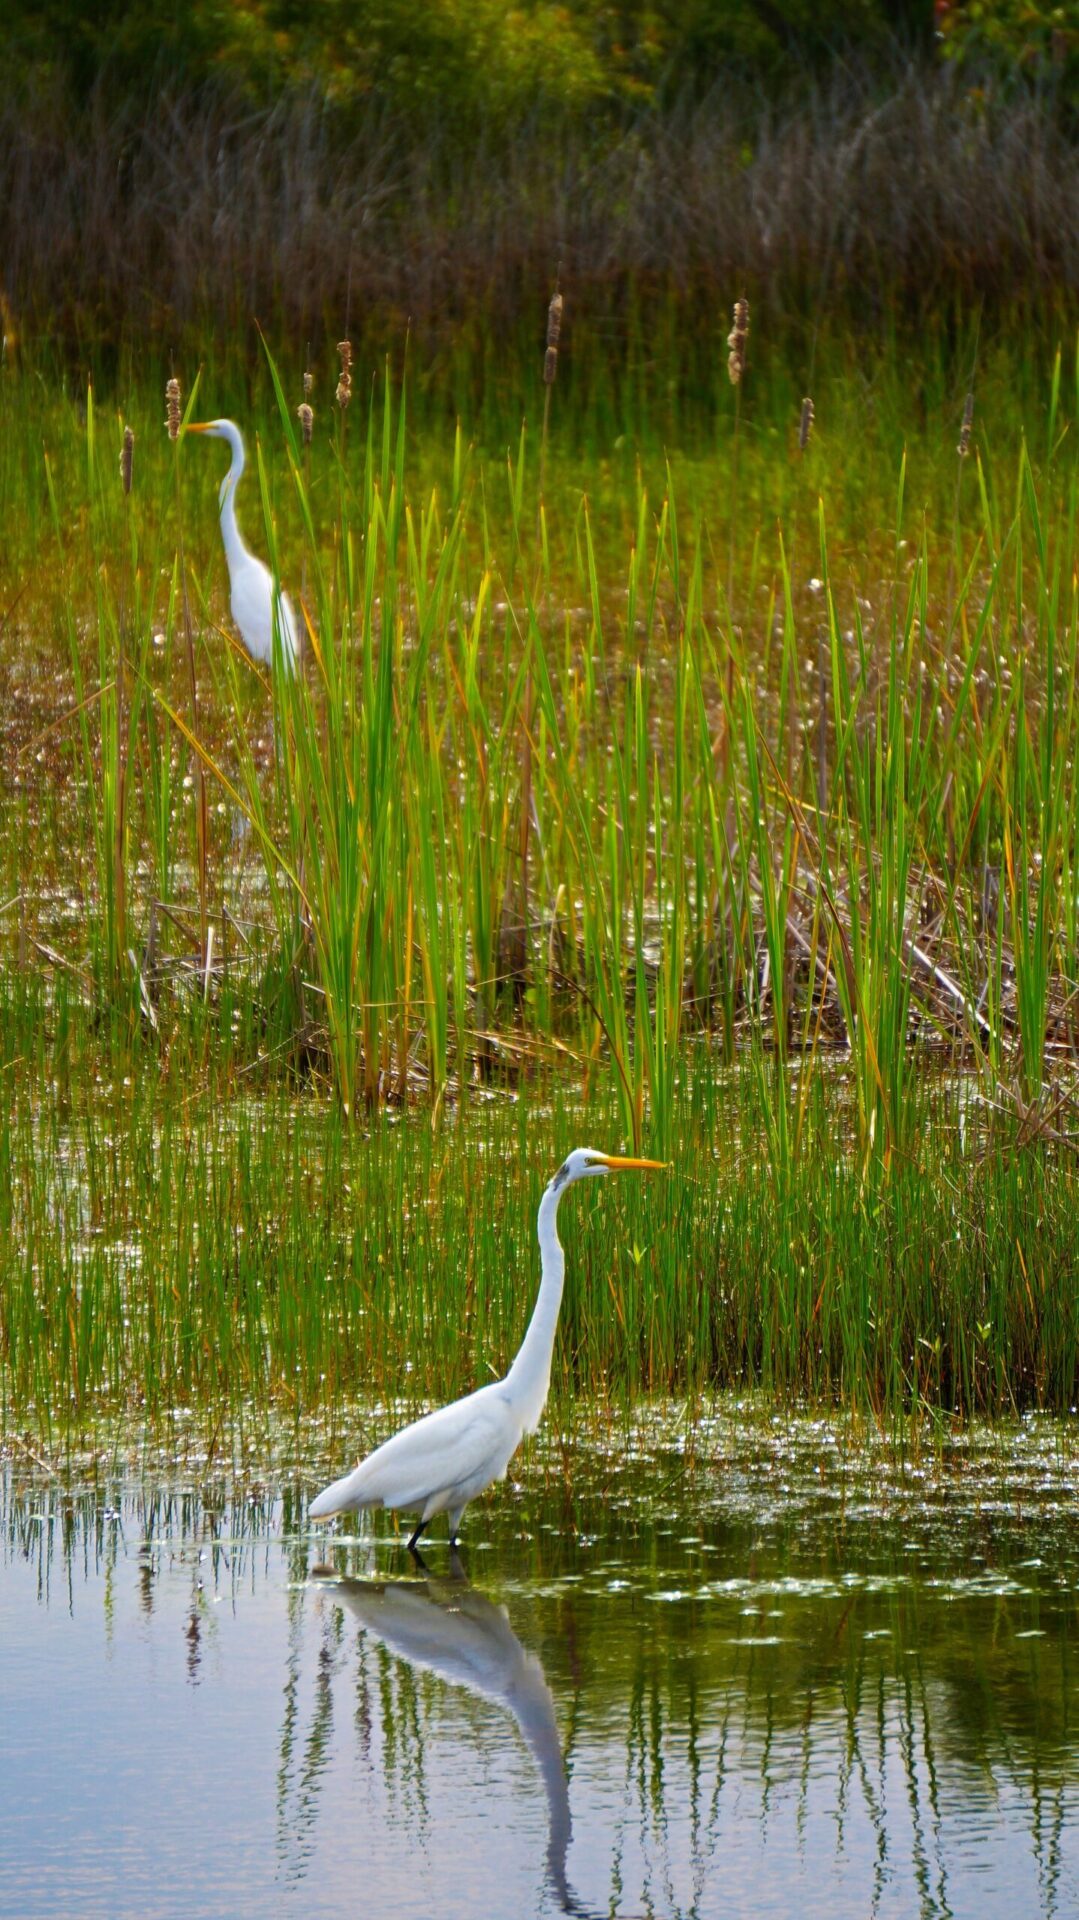 two birds standing in shallow water surrounded by plants in a wetland